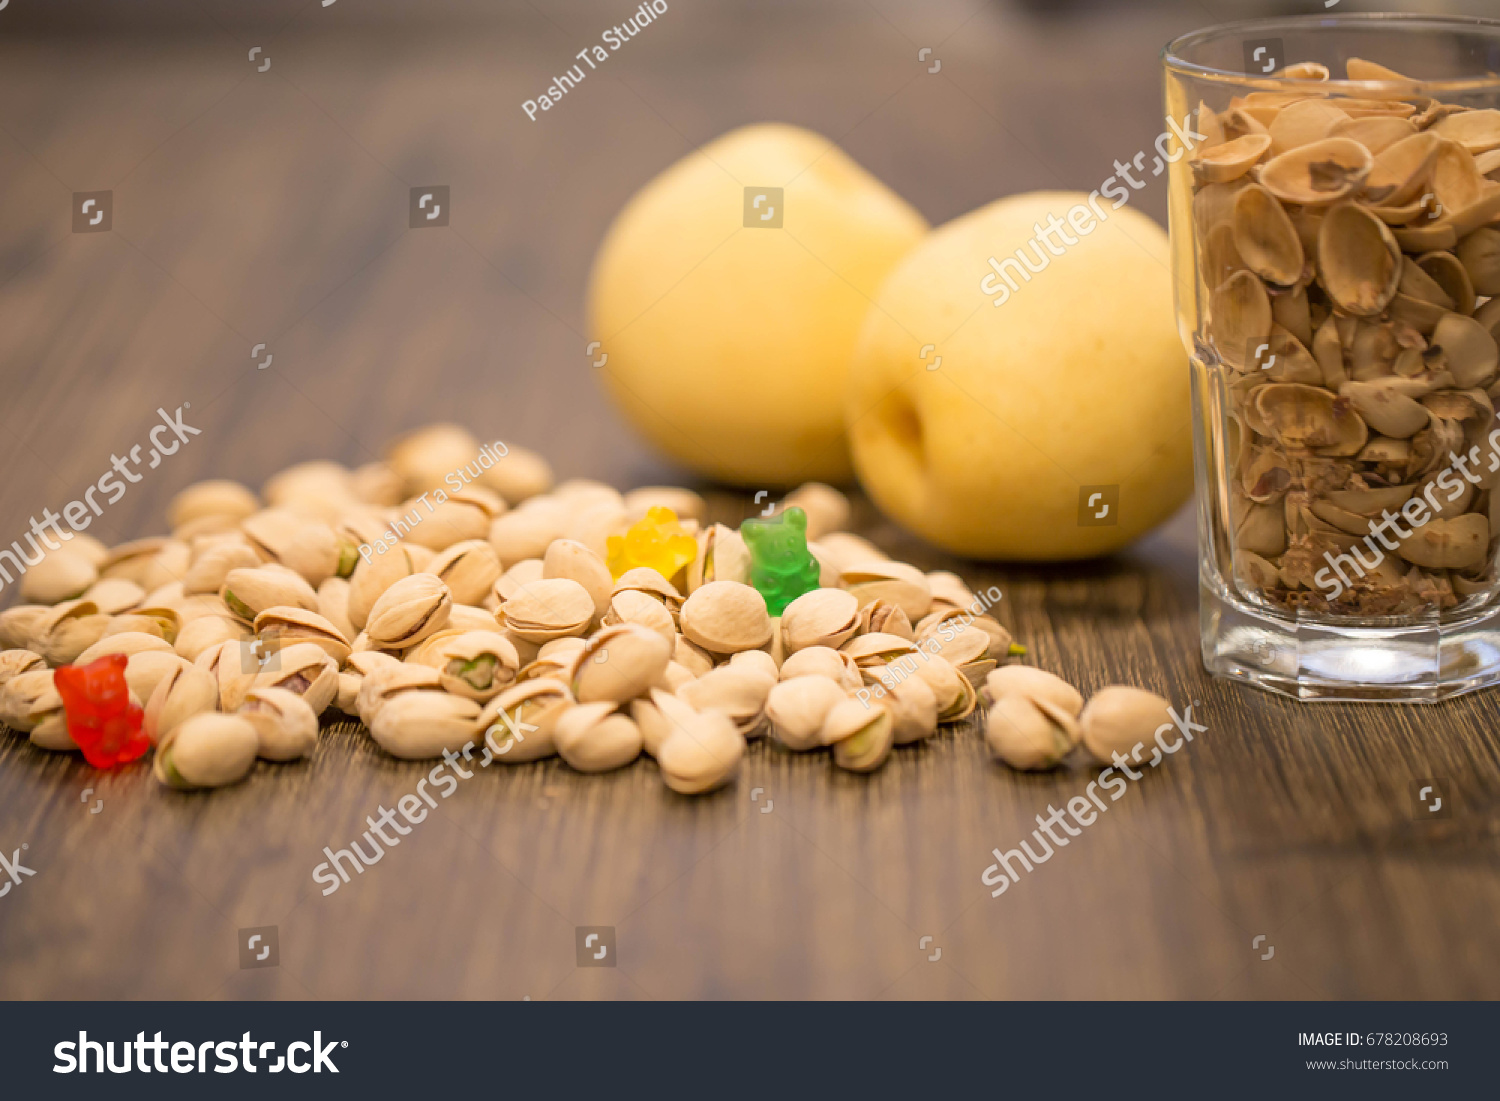 Pistachios Asian Pears Gummy Bears Candy Stock Photo Edit Now